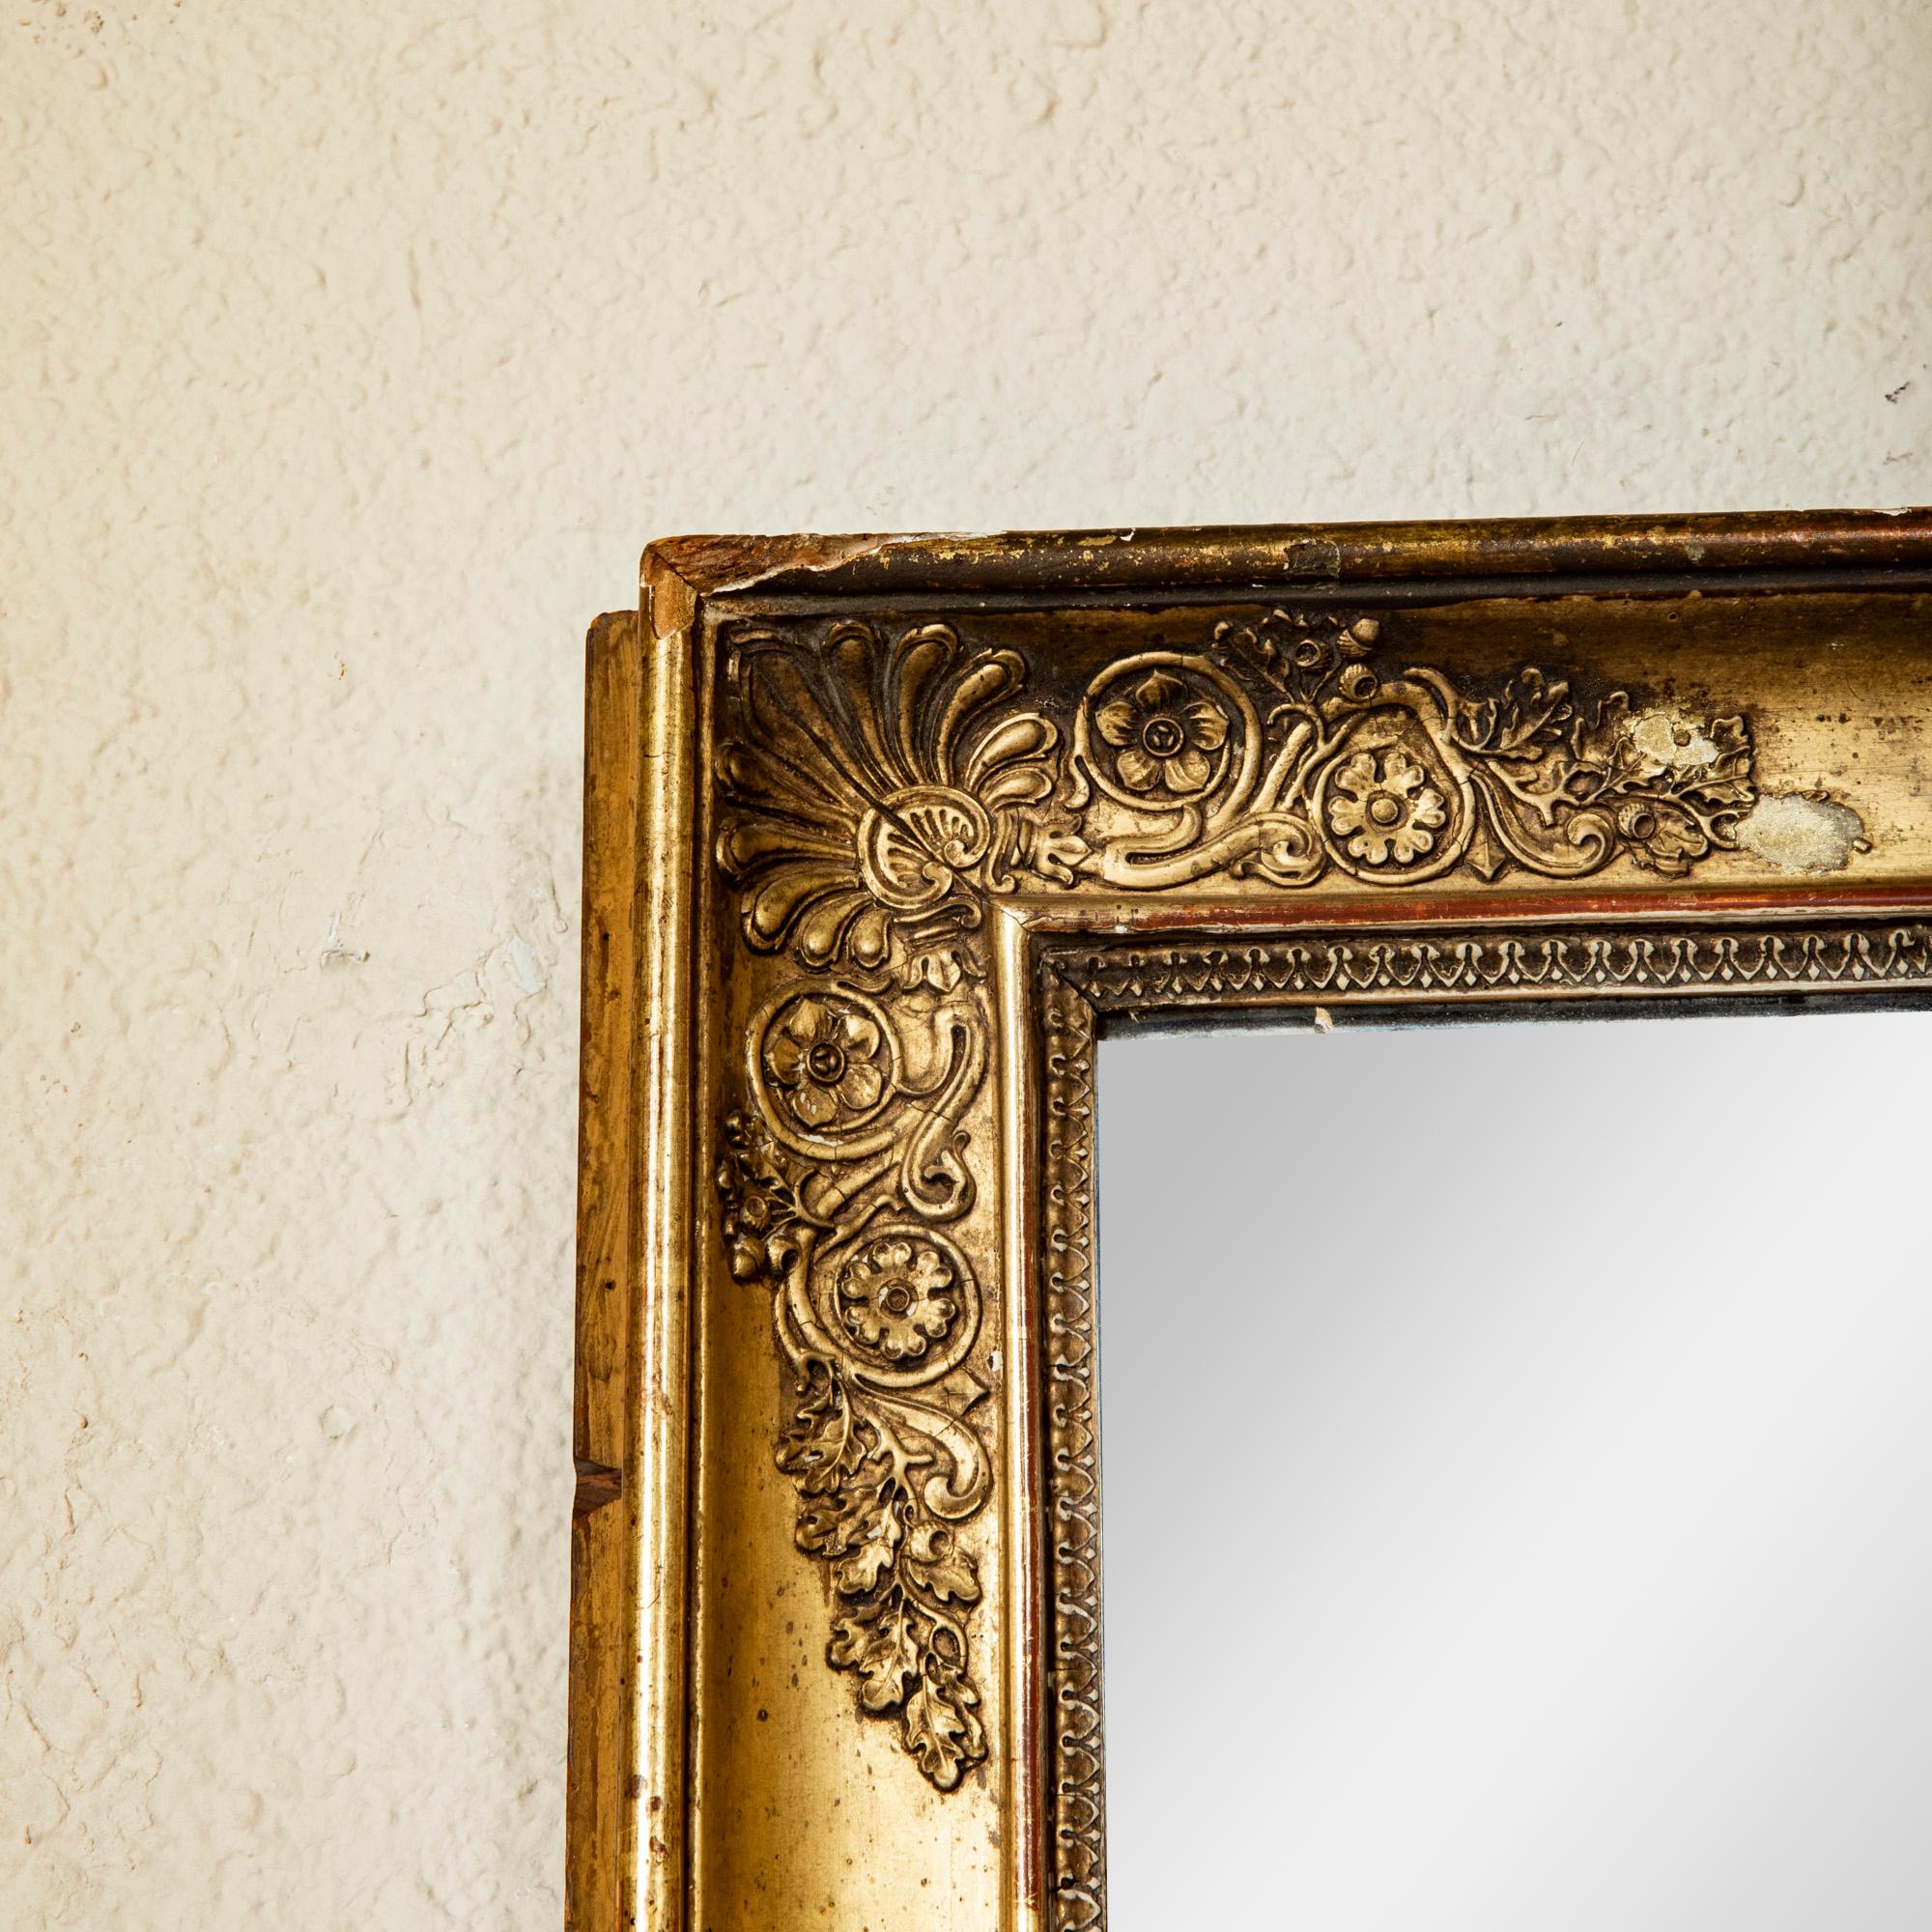 Narrow Early 19th Century French Restauration Period Giltwood Mirror For Sale 4